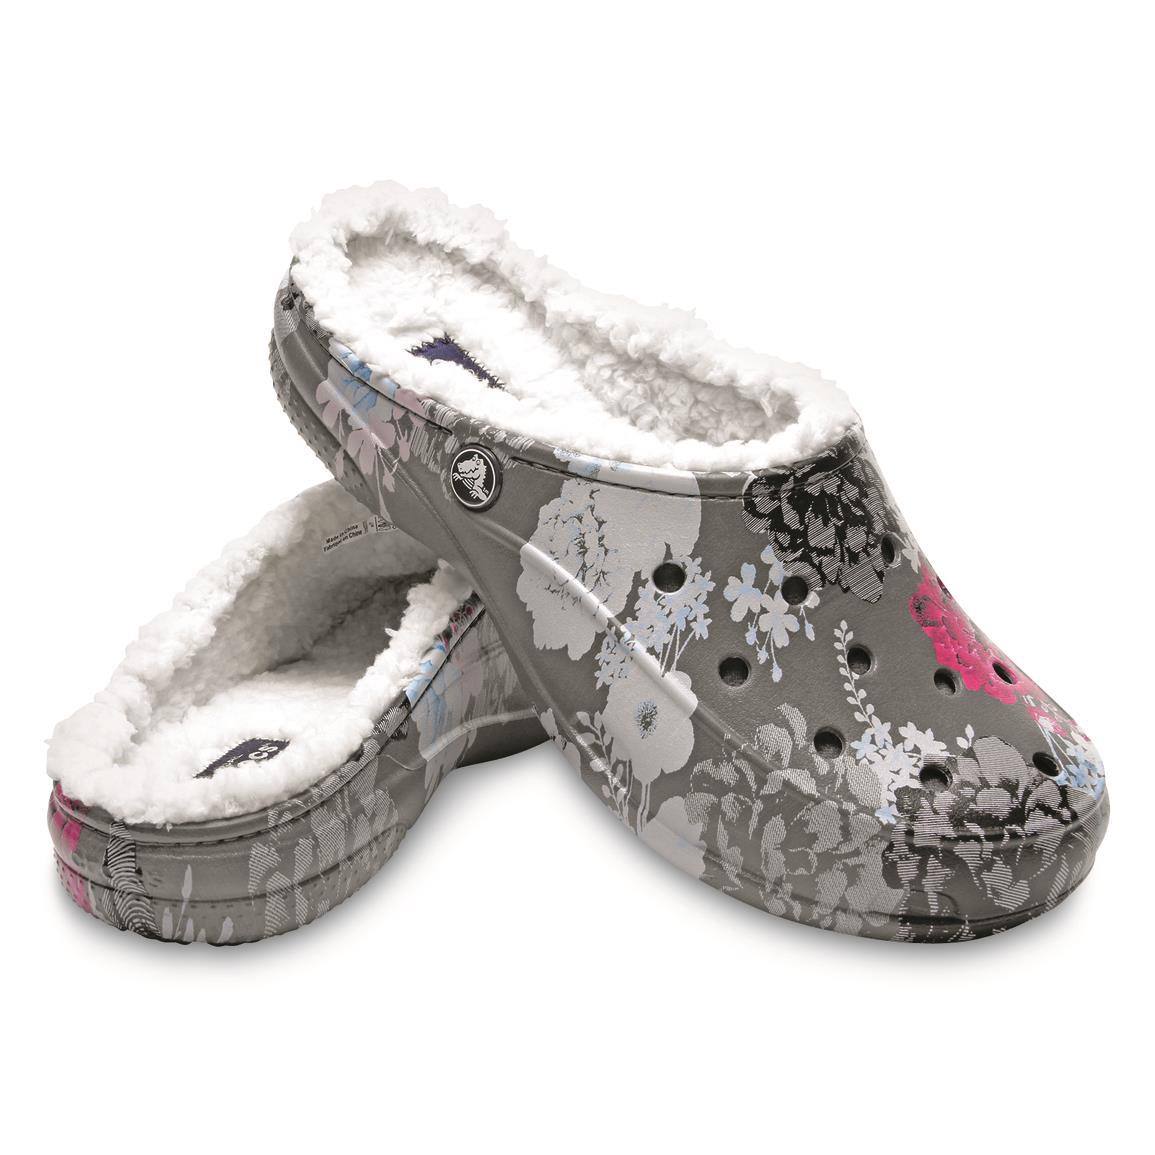 Crocs Women's Freesail Graphic Lined Clogs - 699559, Casual Shoes at Sportsman's Guide